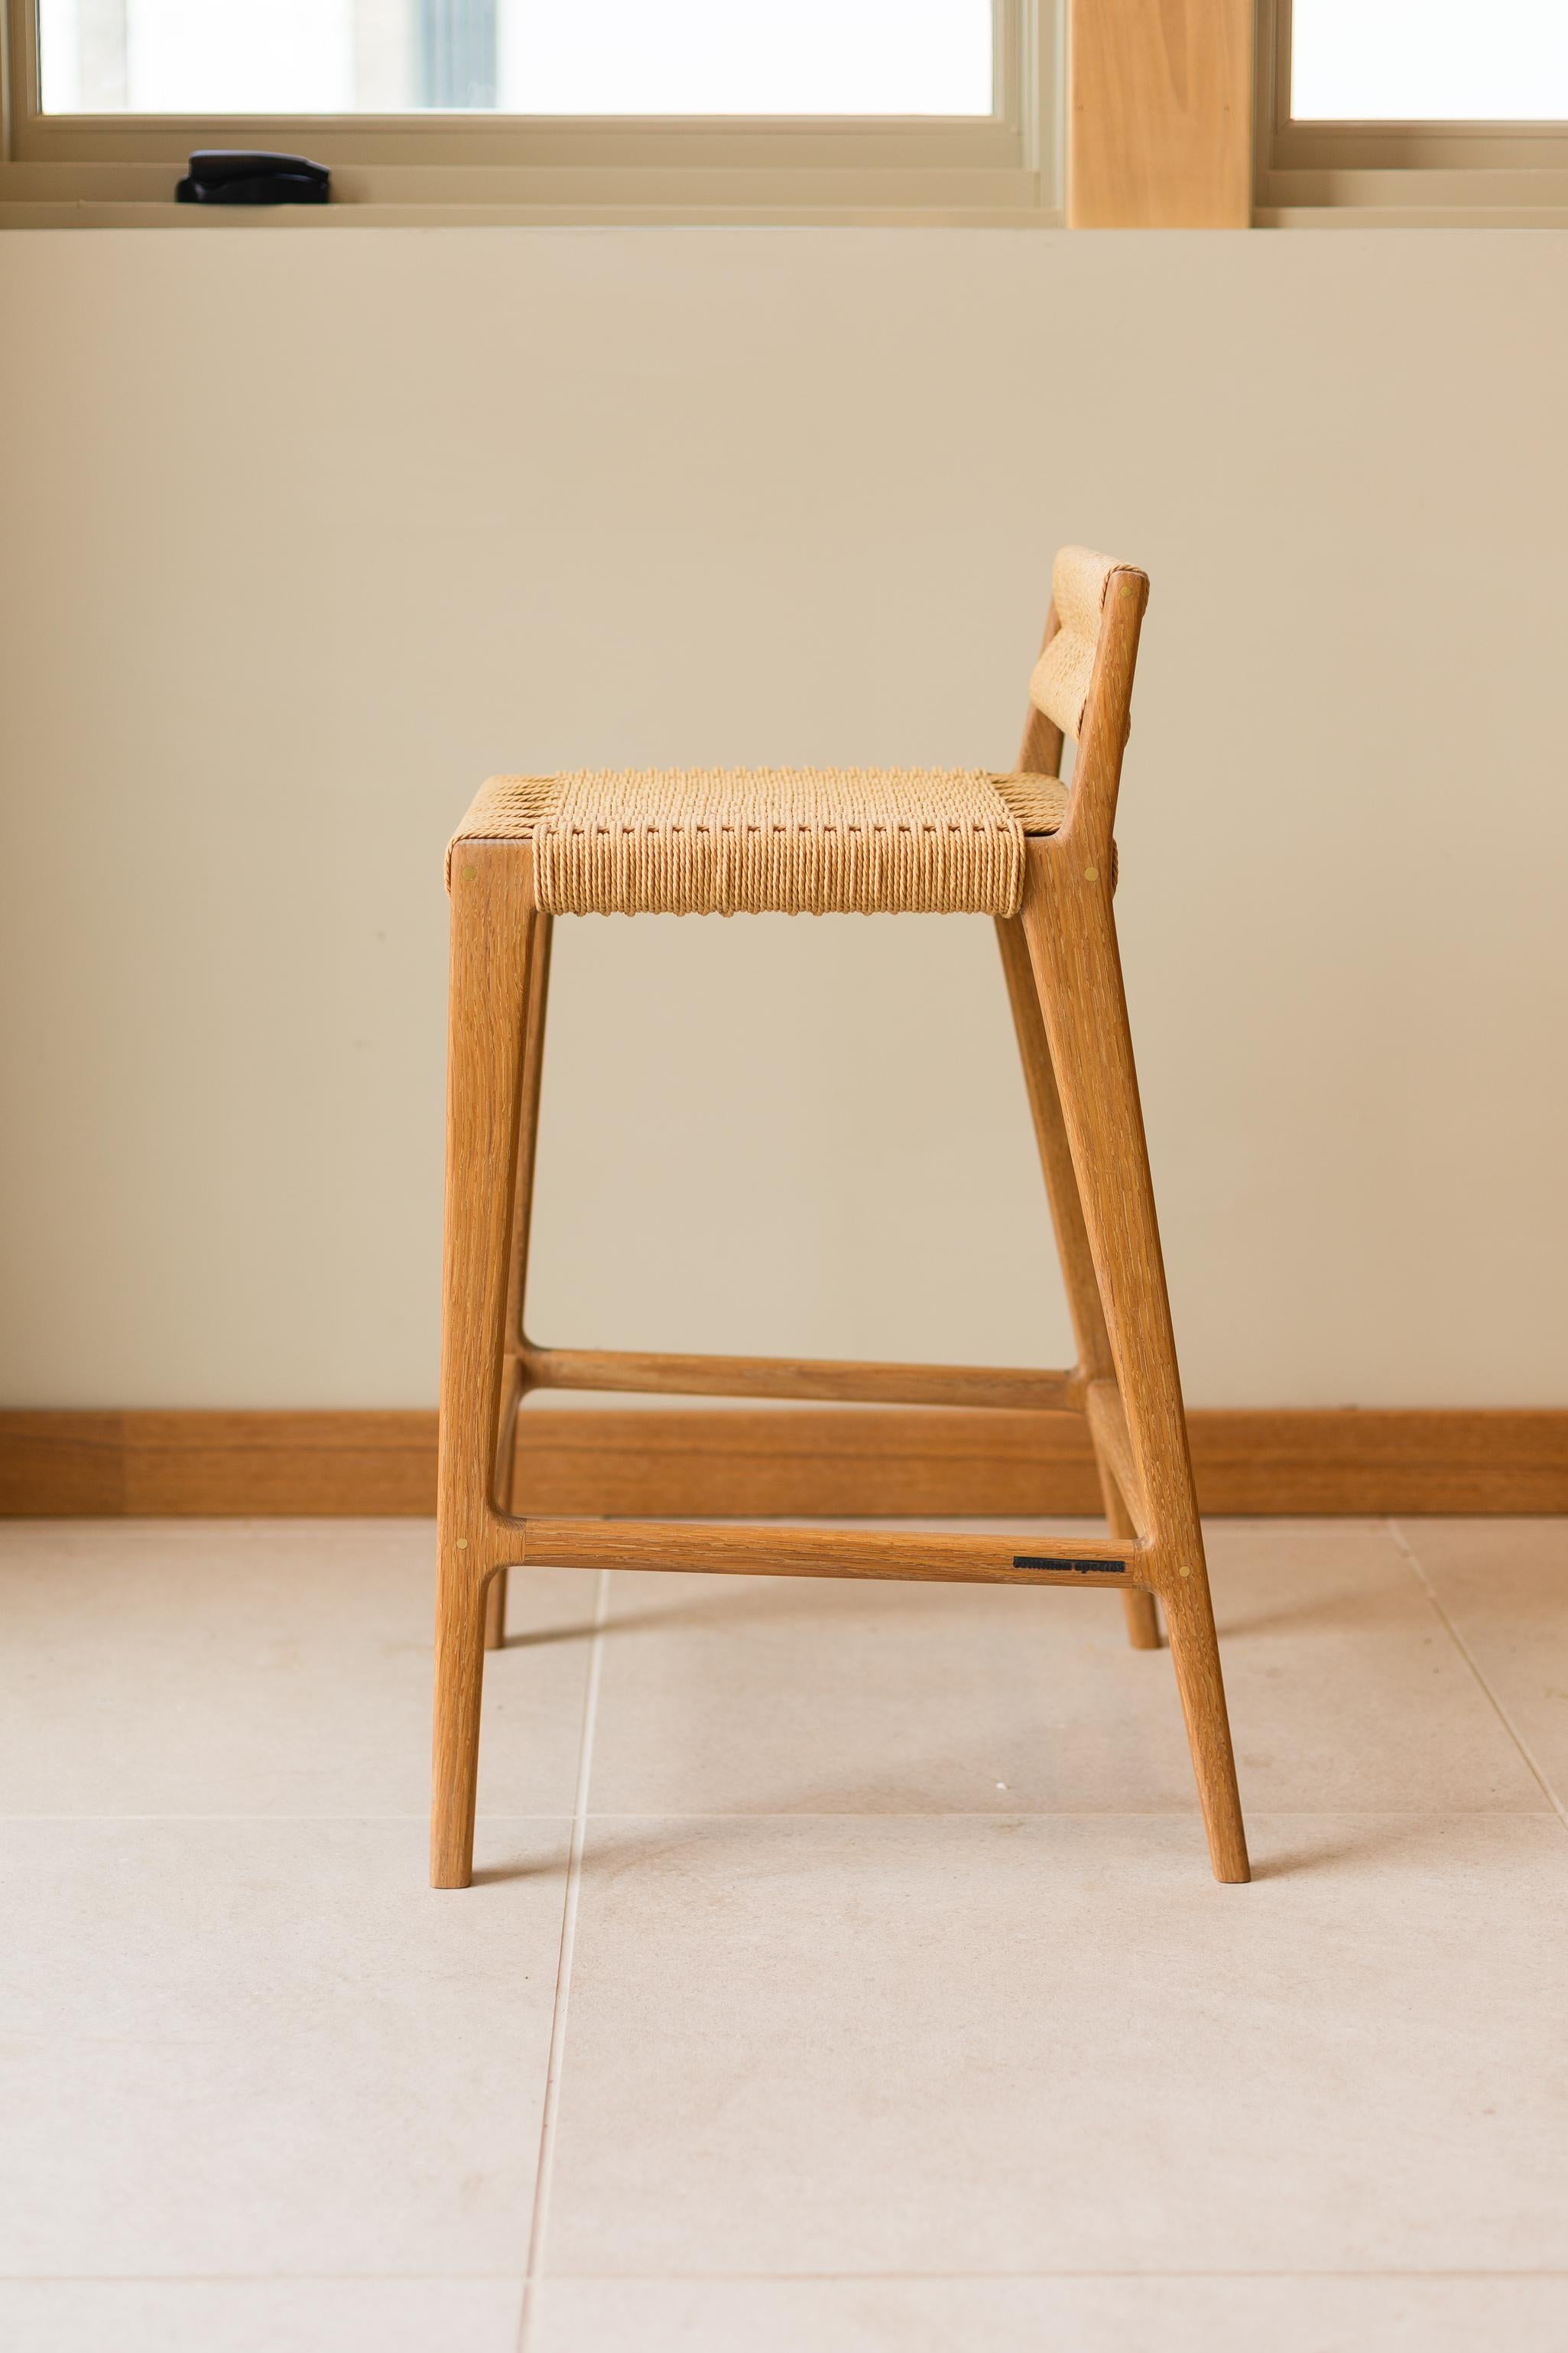 Hand-Crafted Travis Modern Stool with Woven Danish Cord Seat and Low Back in White Oak For Sale